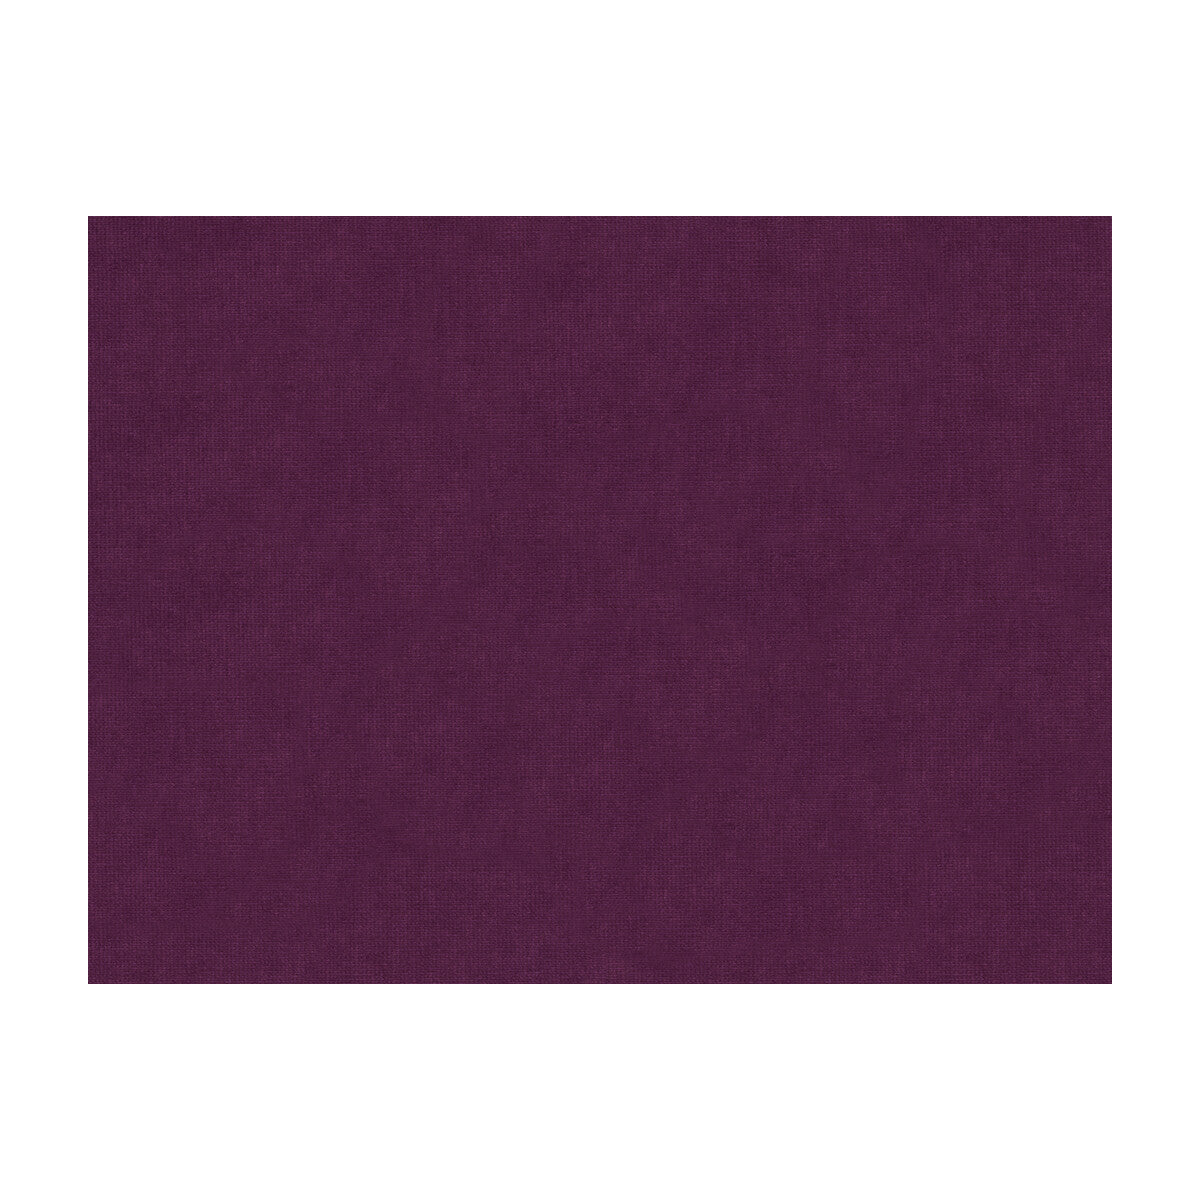 Charmant Velvet fabric in plum color - pattern 8013150.10.0 - by Brunschwig &amp; Fils